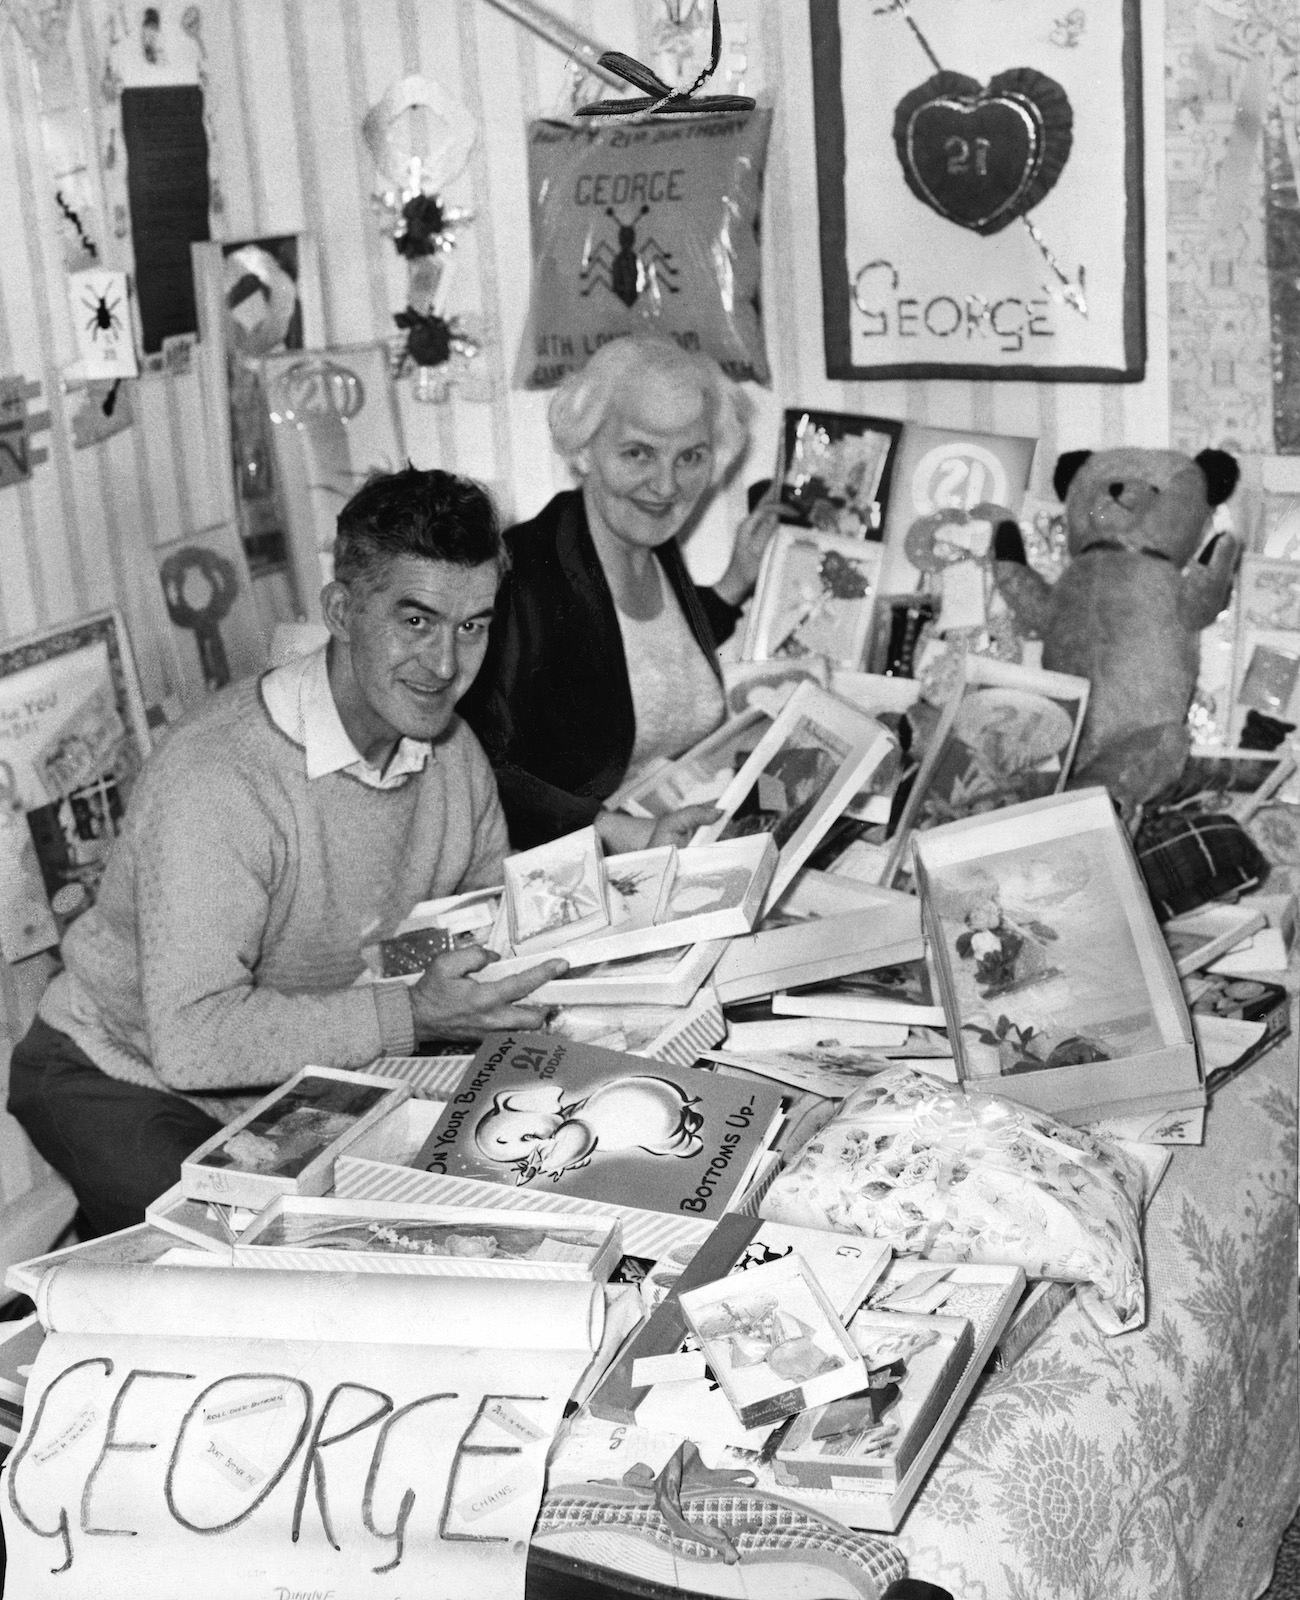 George Harrison's parents, Harold and Louise, looking through the birthday cards they were sent by their son's fans on his 21st birthday.